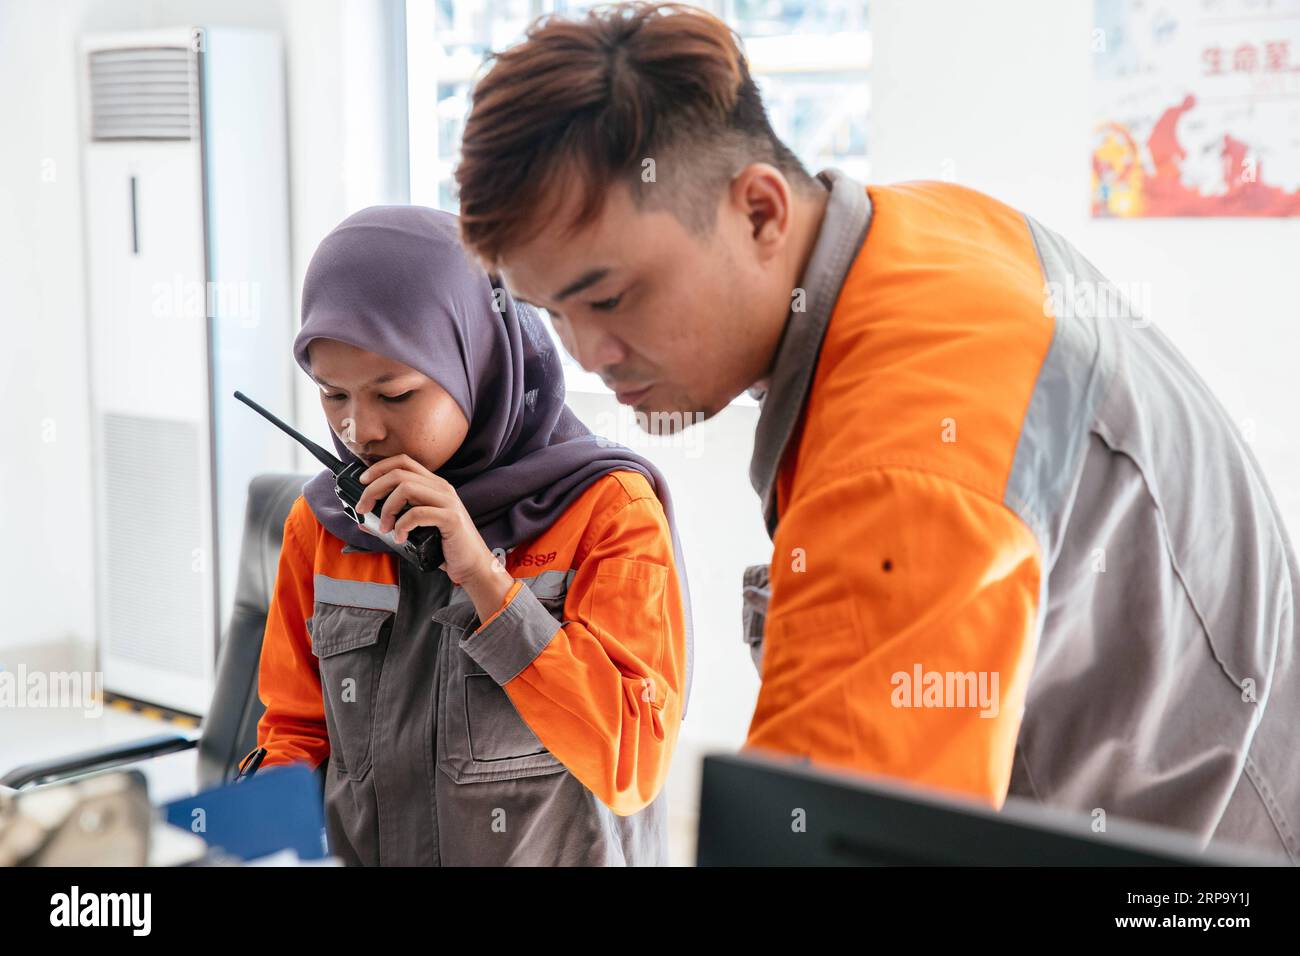 (190419) -- KUALA LUMPUR, April 19, 2019 (Xinhua) -- Nur Fatihah Binti Zakaria (L) works at the coal preparation central control room at the Alliance Steel coking plant in Kuantan, Malaysia, April 15, 2019. At the beginning Malaysian college graduate Nur Fatihah Binti Zakaria had no idea about what steel production was all about, nor did she have any knowledge about speaking Chinese. But after almost two years working at the Alliance Steel at the Malaysia, China Kuantan Industrial Park, she now can perform her job skillfully, even making fun of her colleagues from China that not all of them sp Stock Photo